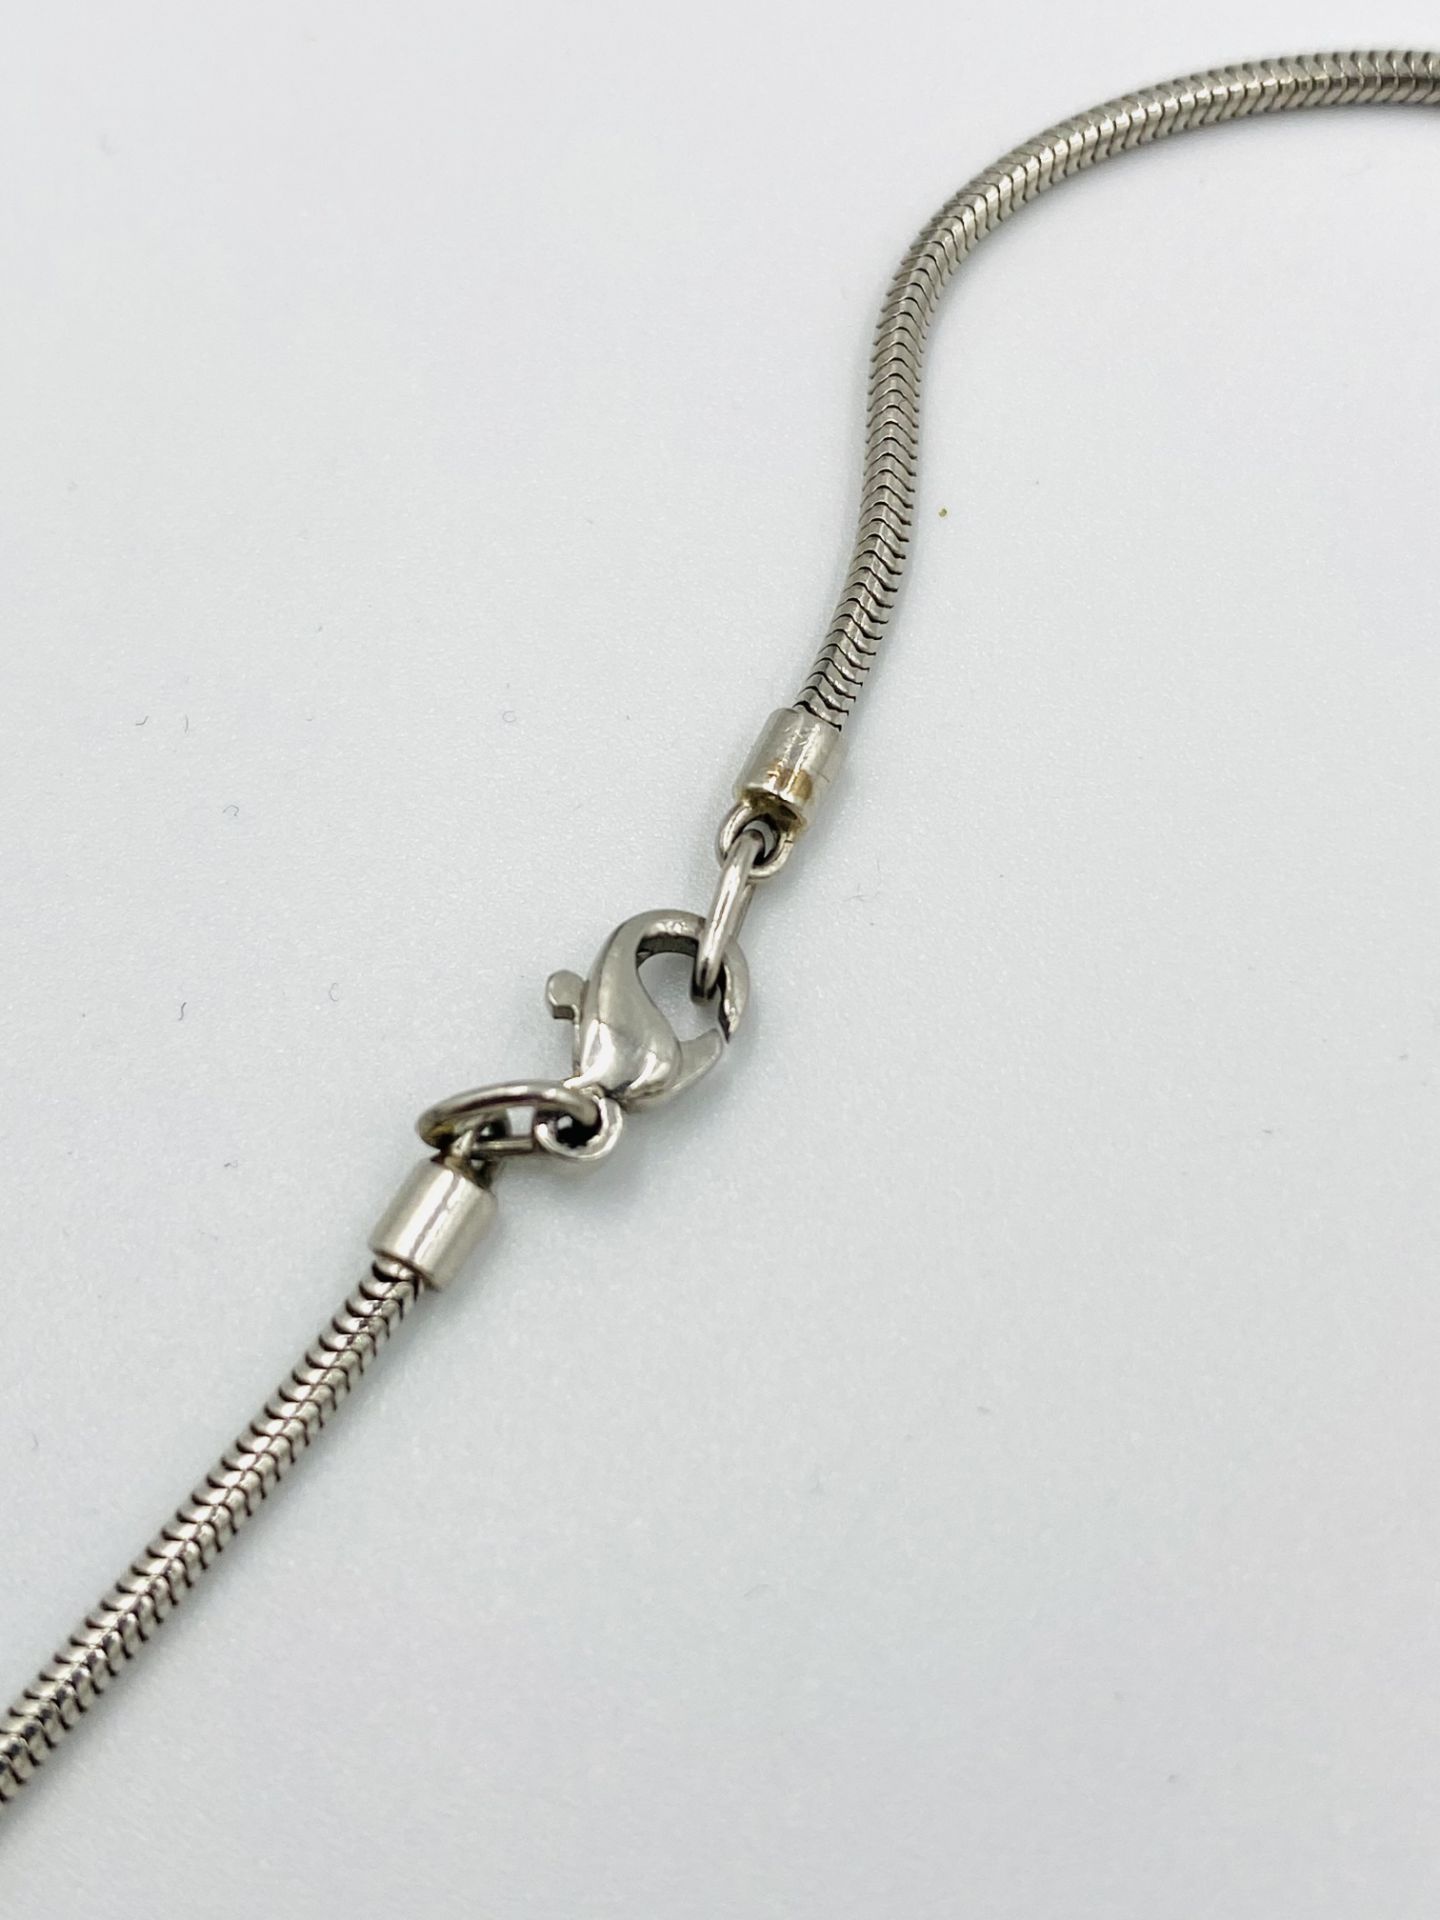 Boodles diamond pendant on white gold chain - Image 4 of 6